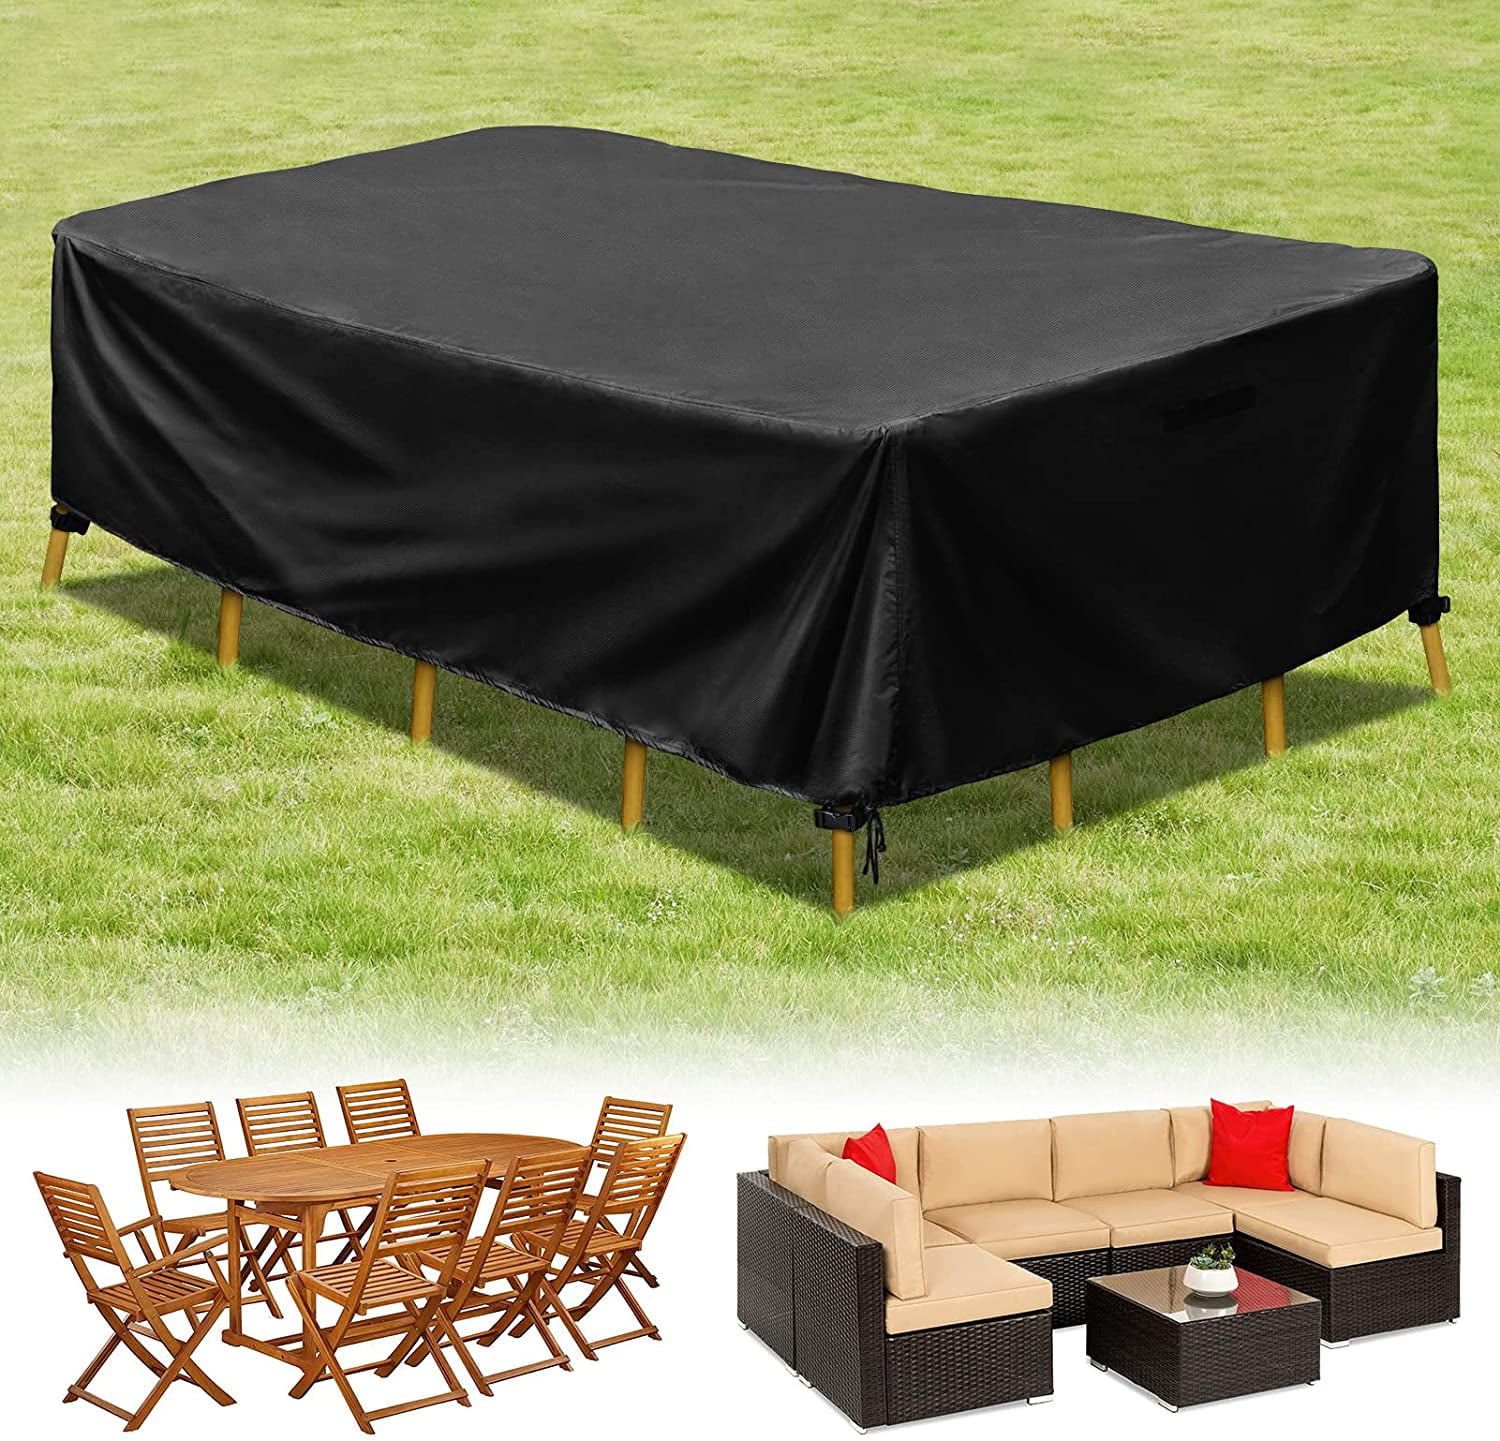 65 Size Outdoor Cover Garden Furniture Waterproof Patio Rattan Table Chair Cube 